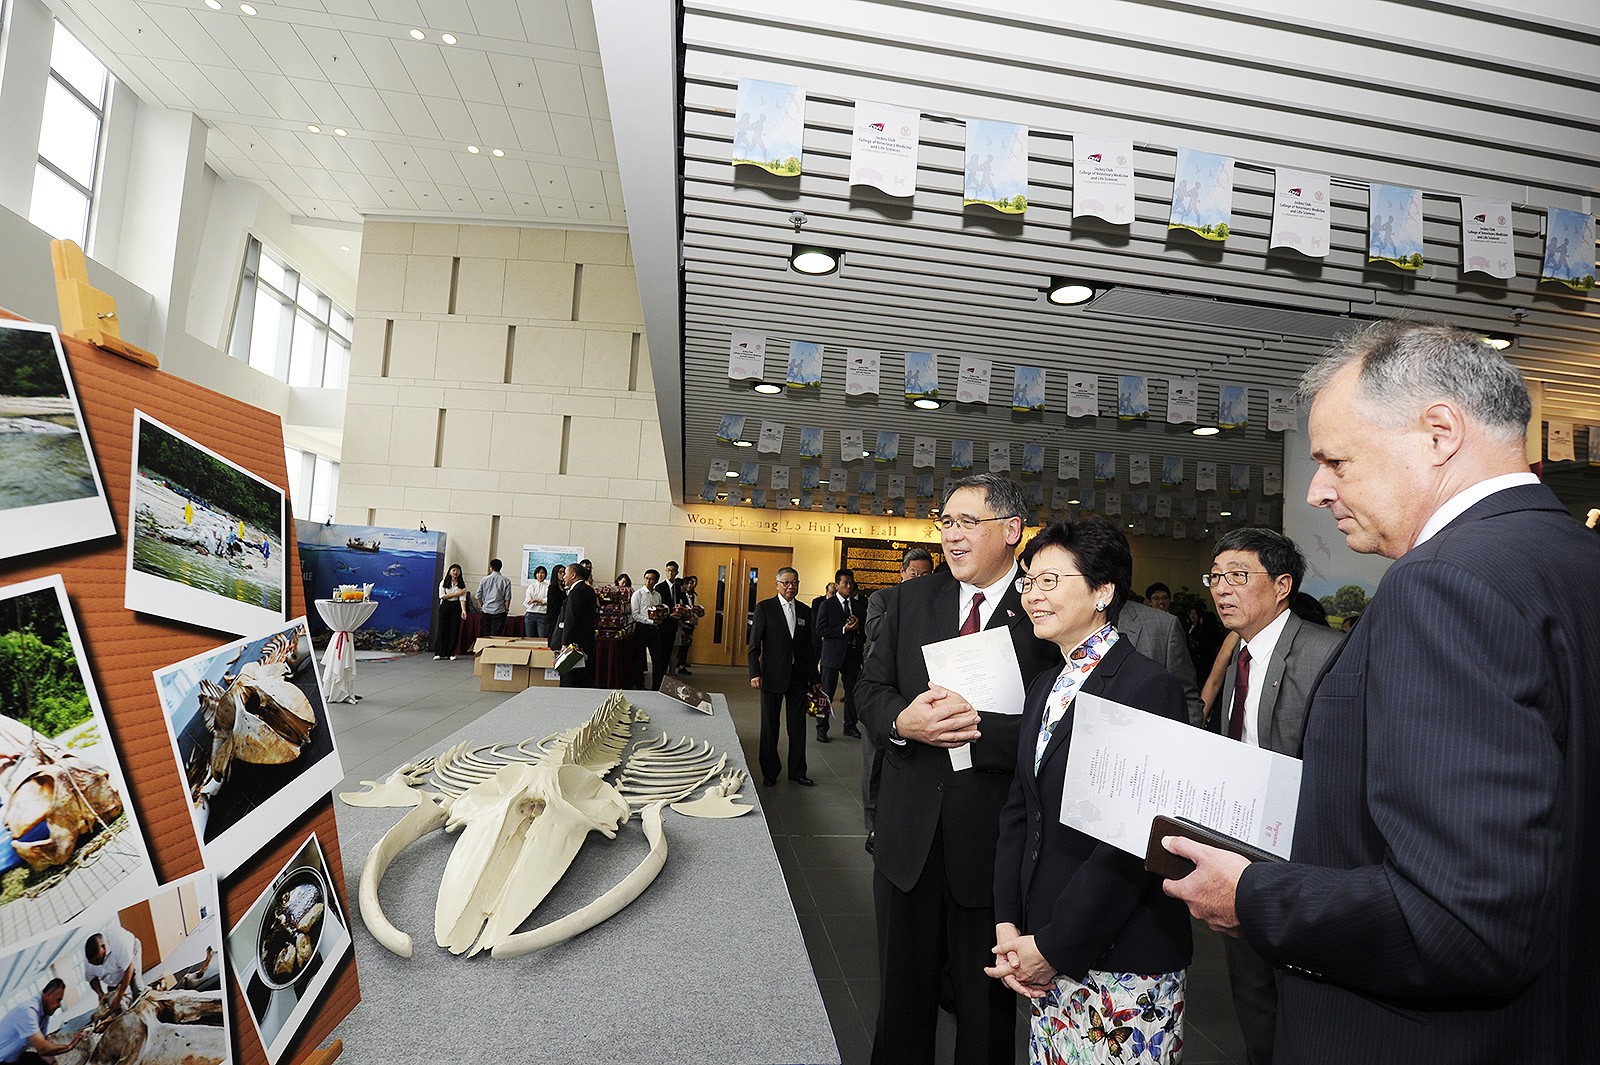 Mrs Carrie Lam (2nd on left) views an exhibition during the naming ceremony for the Jockey Club College of Veterinary Medicine and Life Sciences.